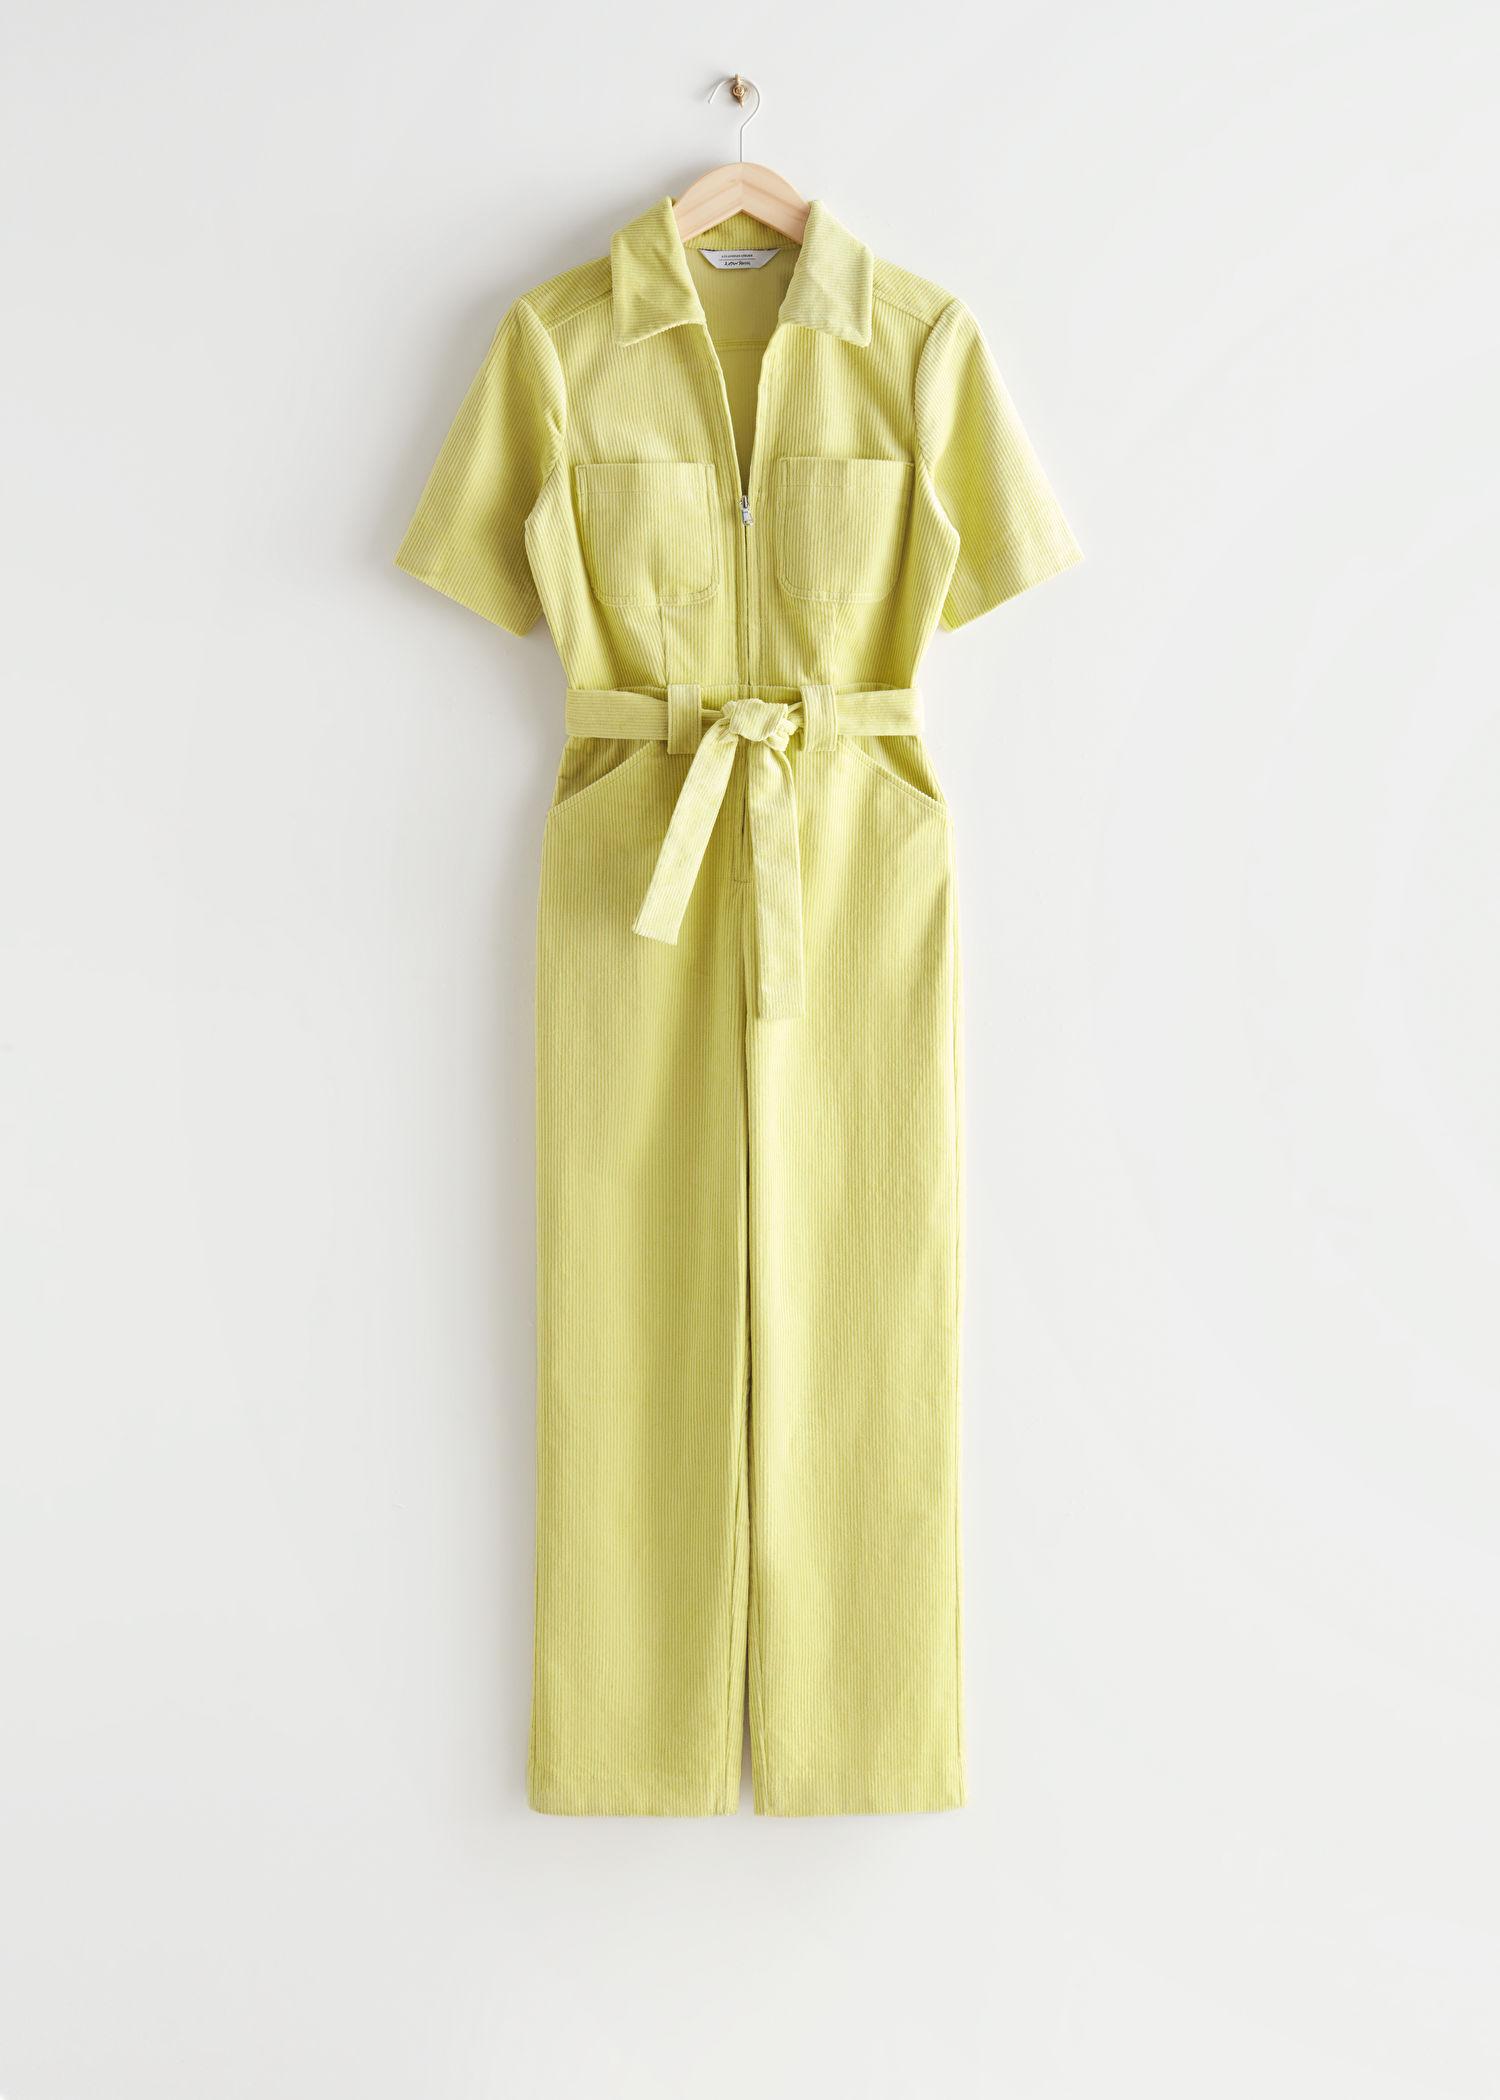 & Other Stories Belted Short Sleeve Jumpsuit in Yellow | Lyst UK